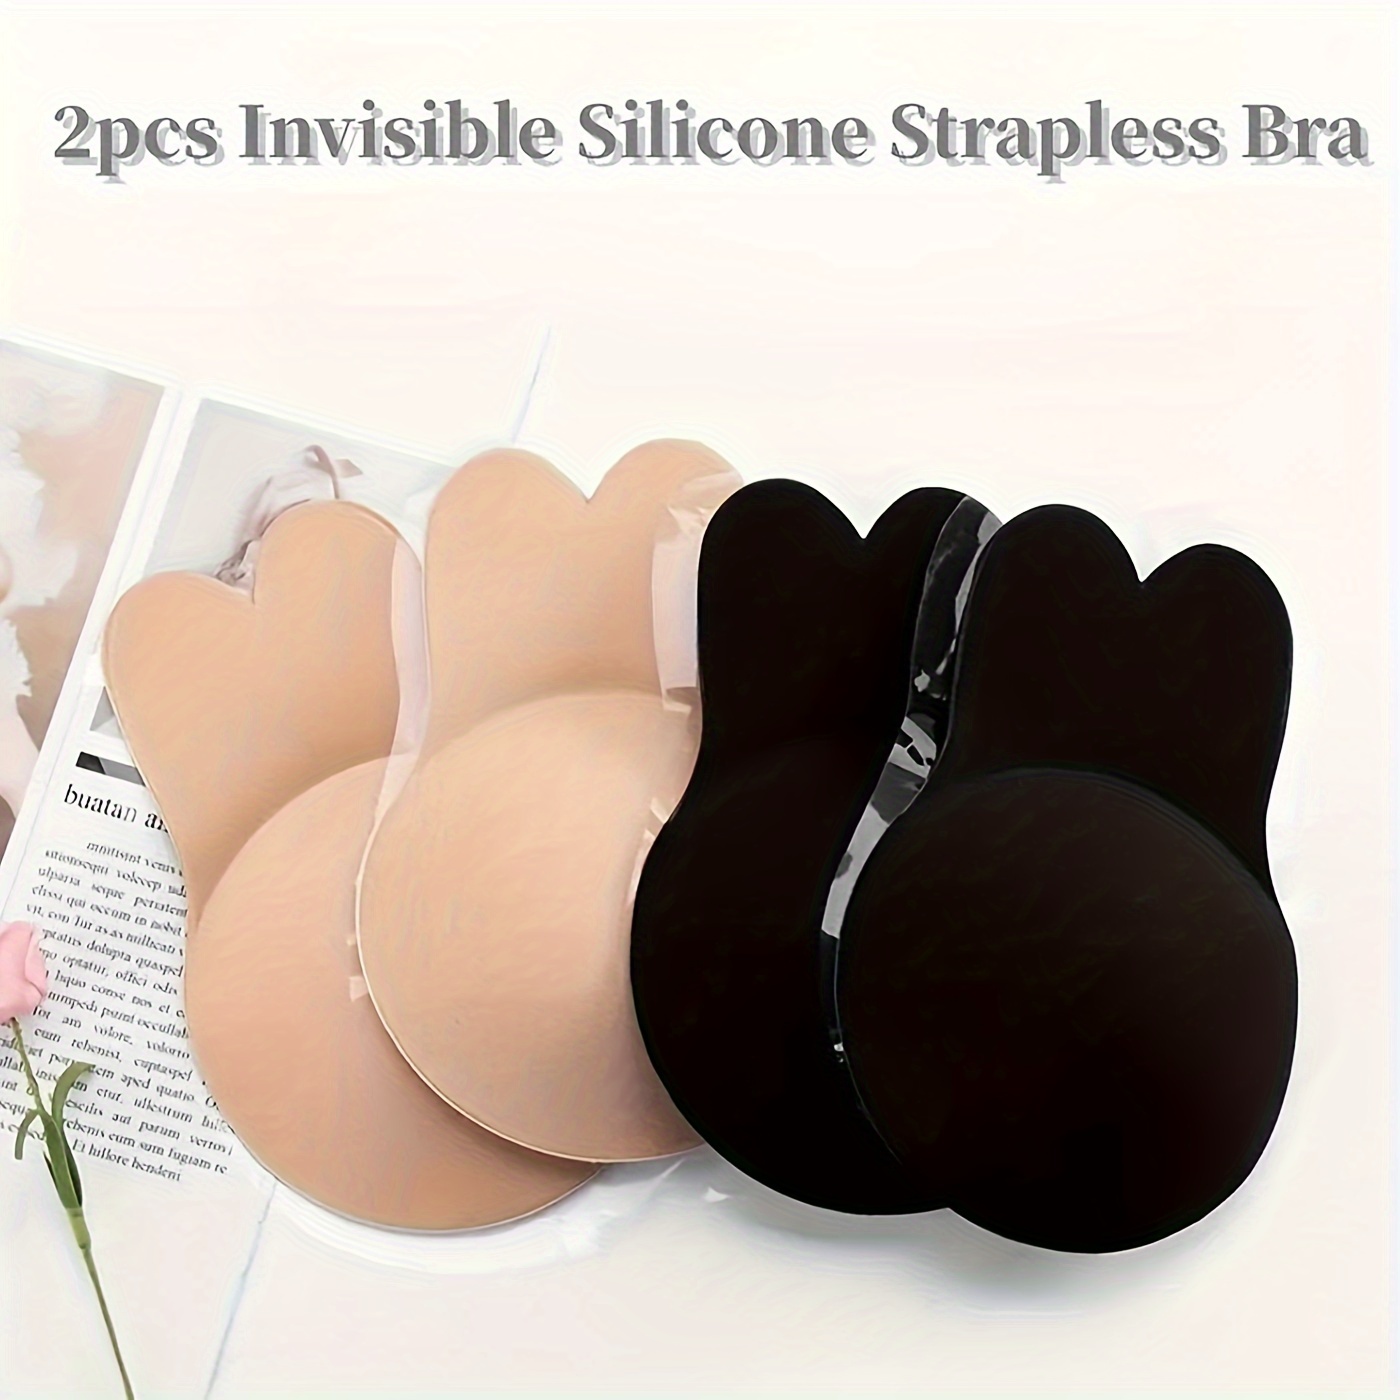 TI AMO Women Push Up Bras for Self Adhesive Silicone Strapless Invisible  Bra Reusable Sticky Breast Lift Up Tape Rabbit Bra Pads, Size(30 Till 38)